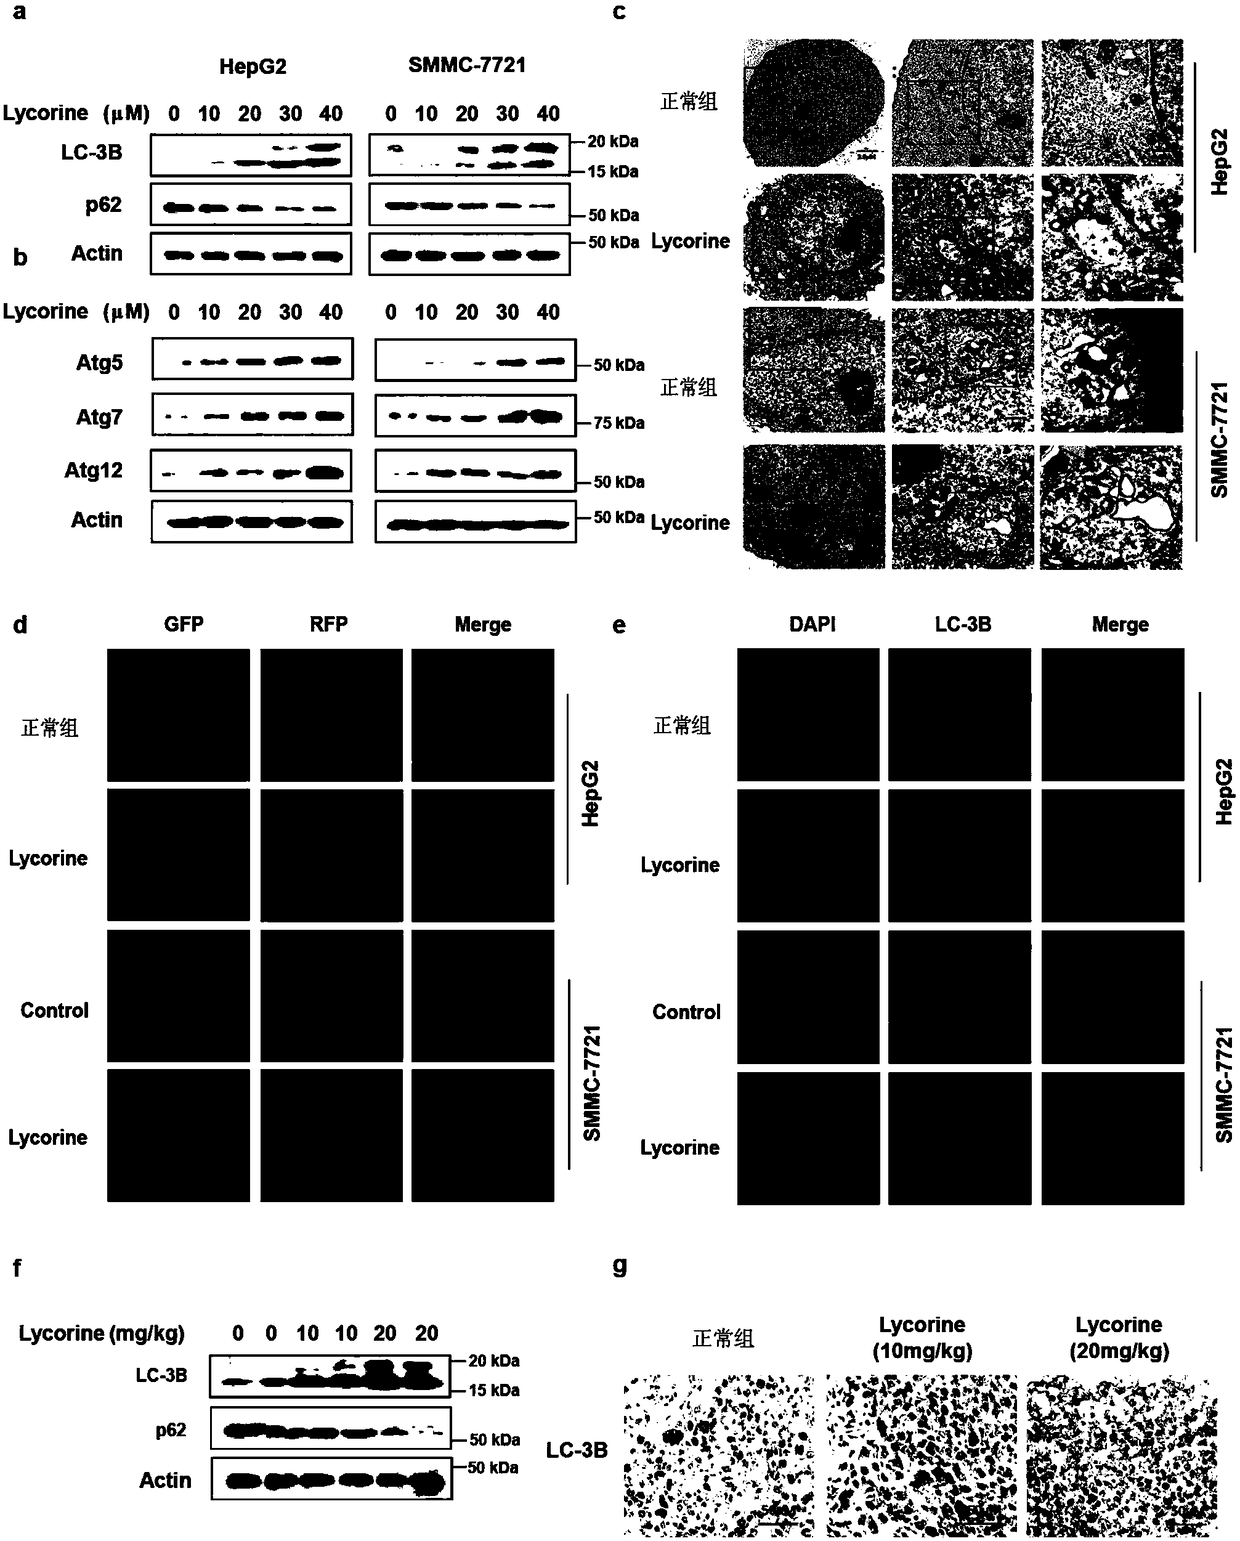 Application of autophagy inhibitor to preparation of medicament for reinforcing anti-hepatoma activity of lycorine